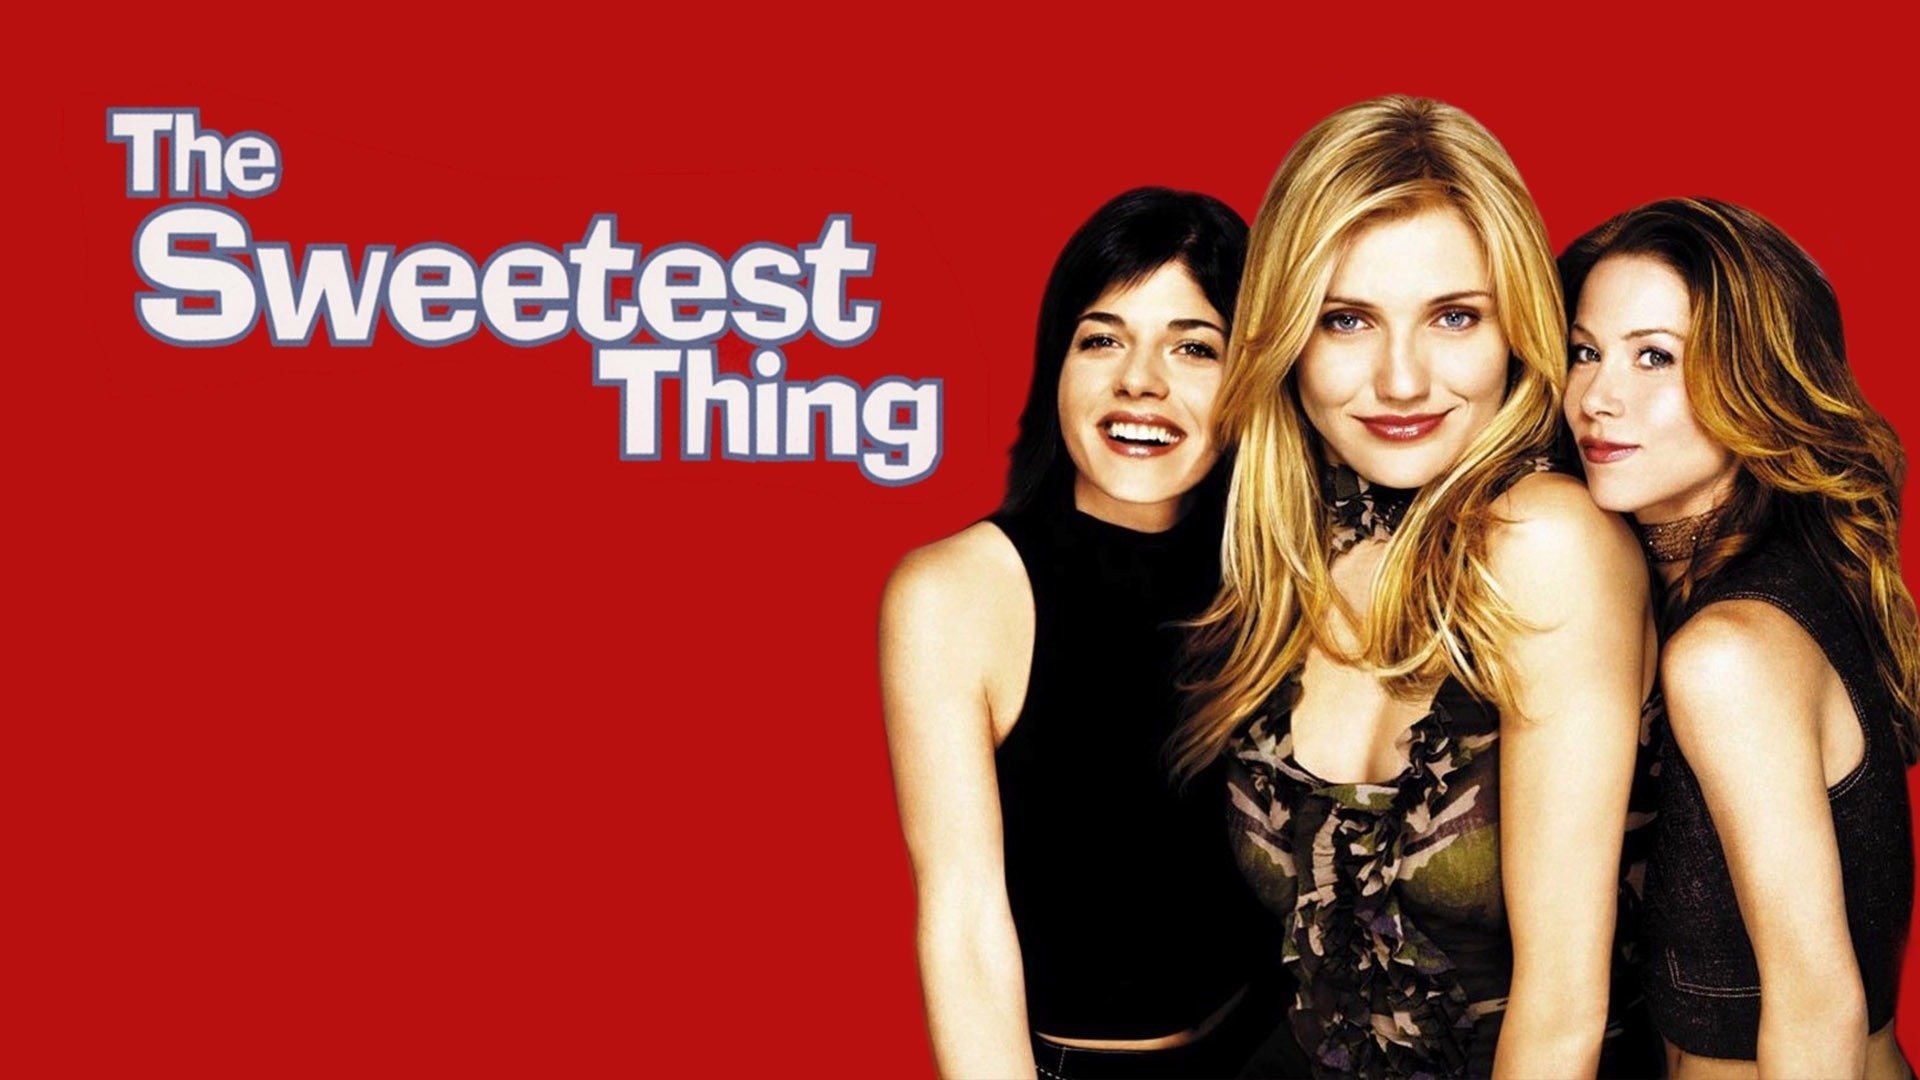 Prime Video: The Sweetest Thing